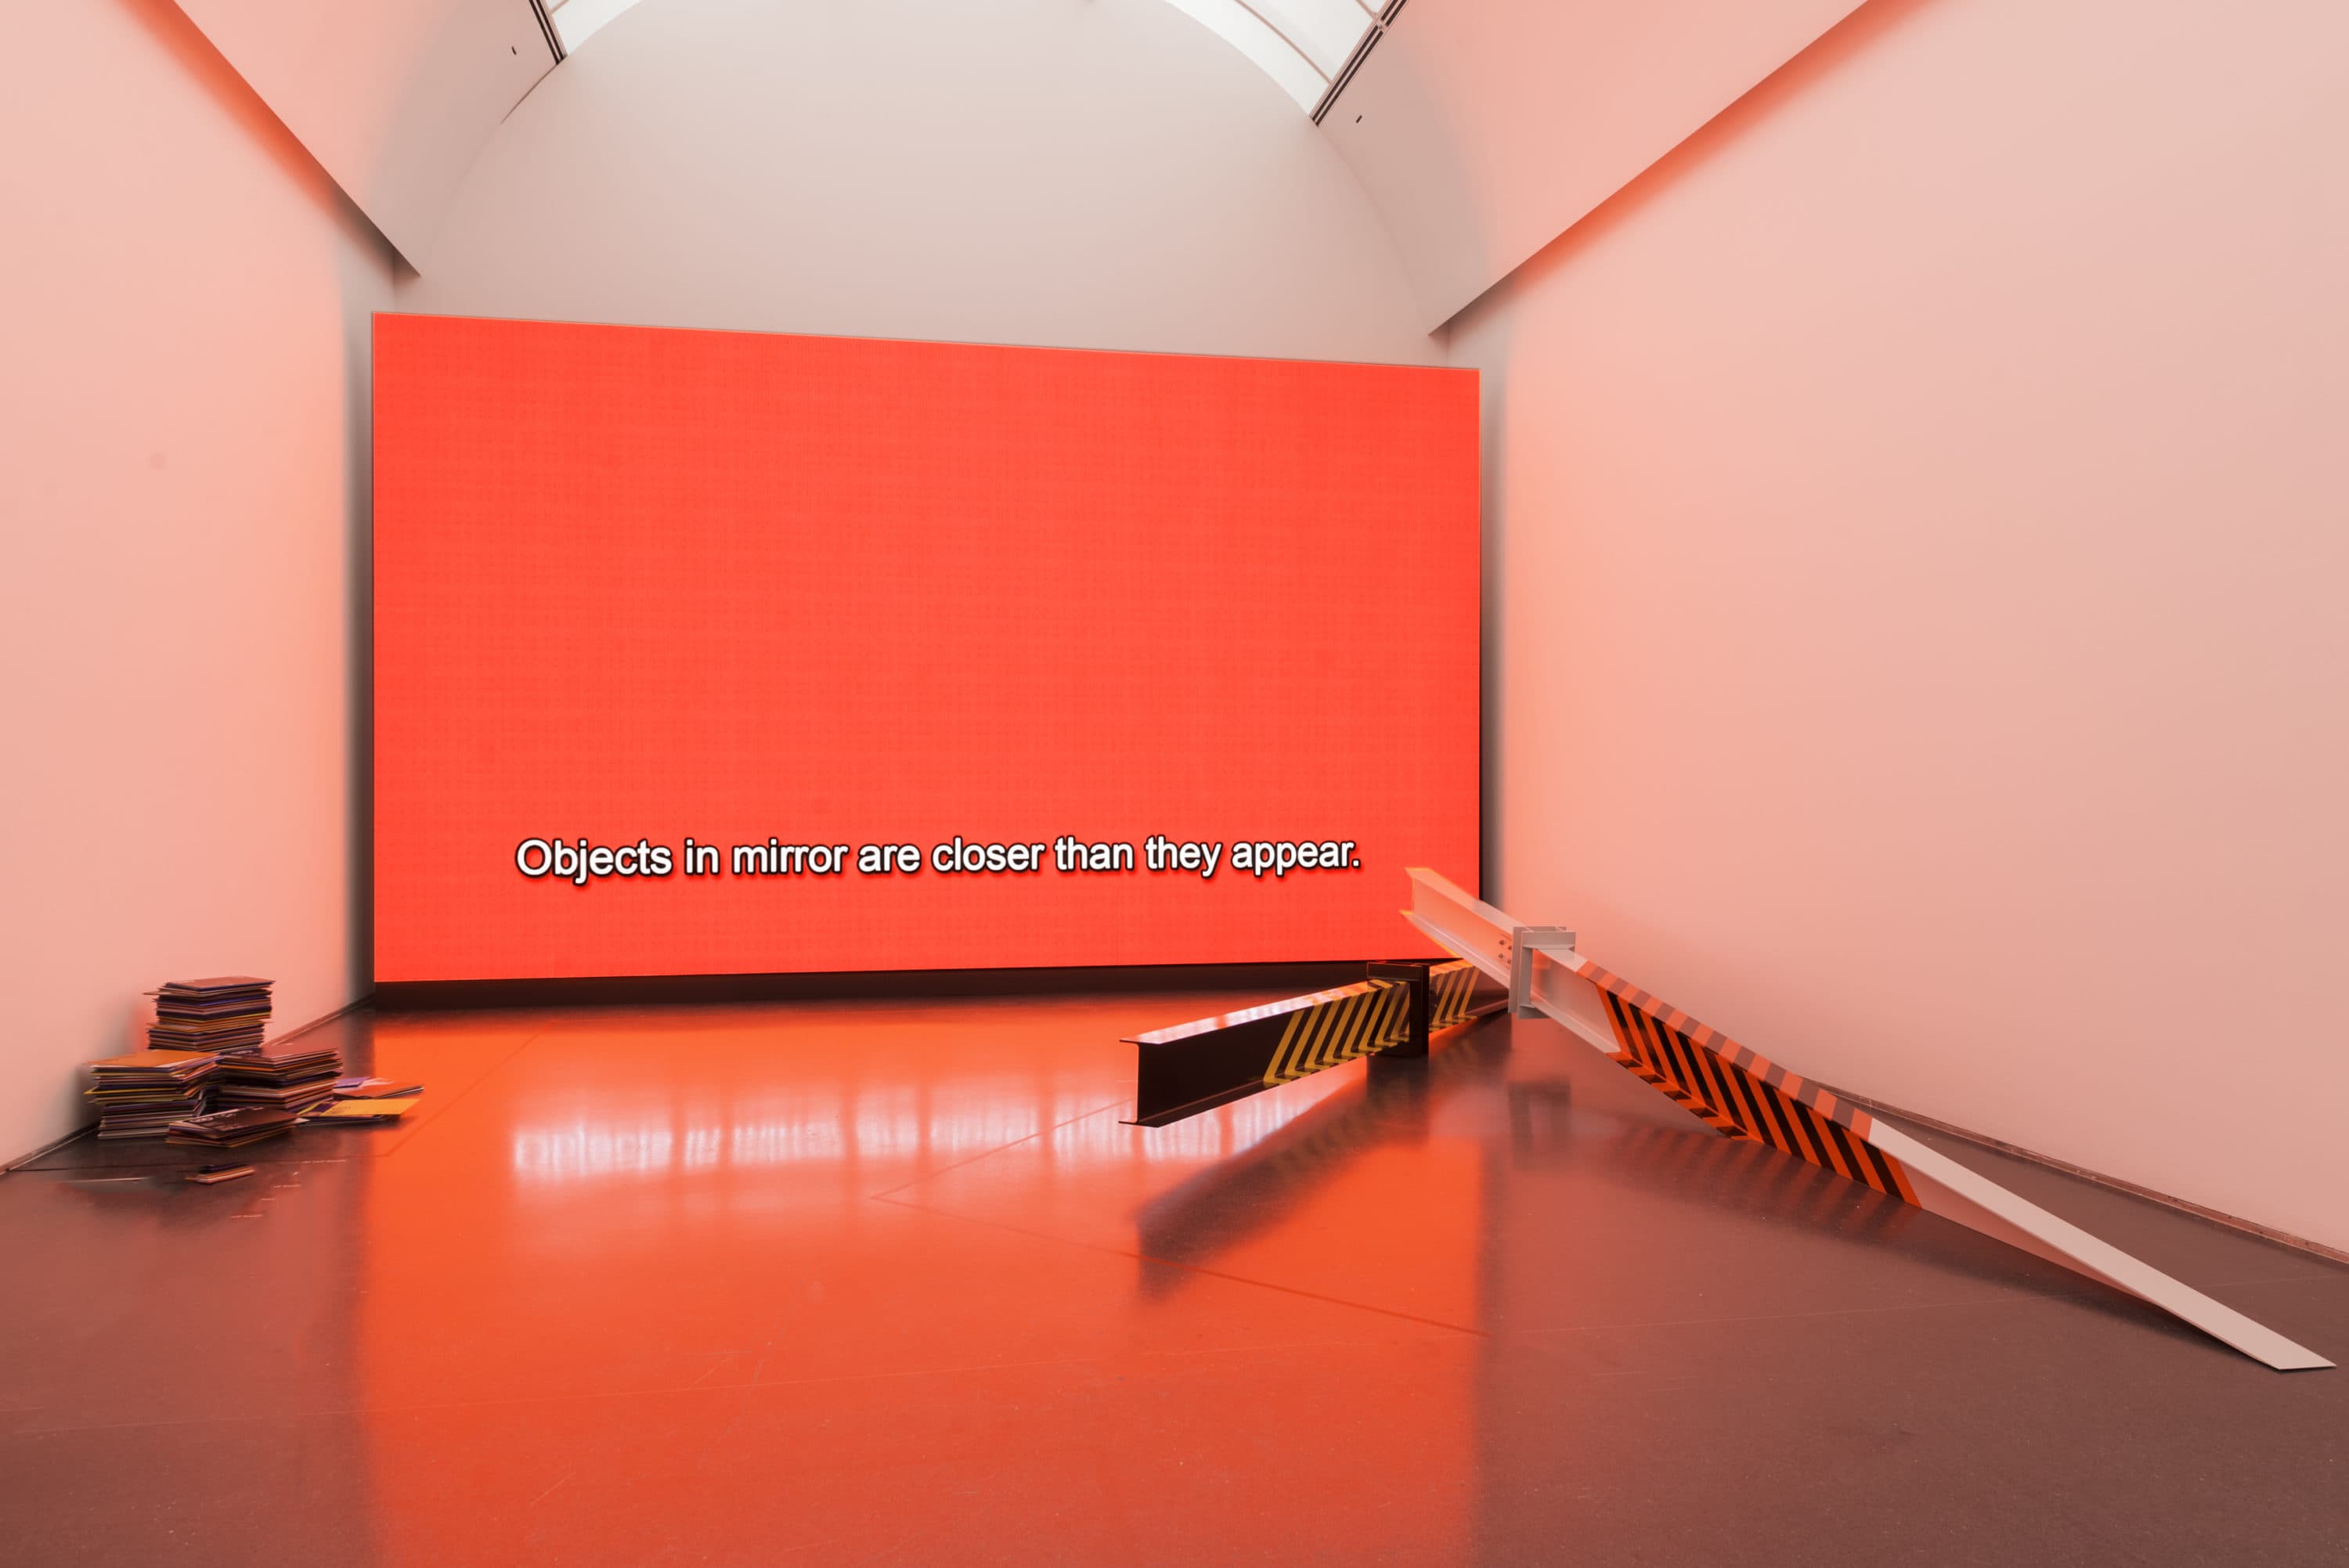 Virgil Abloh's Figures of Speech Exhibition Gets a One Week